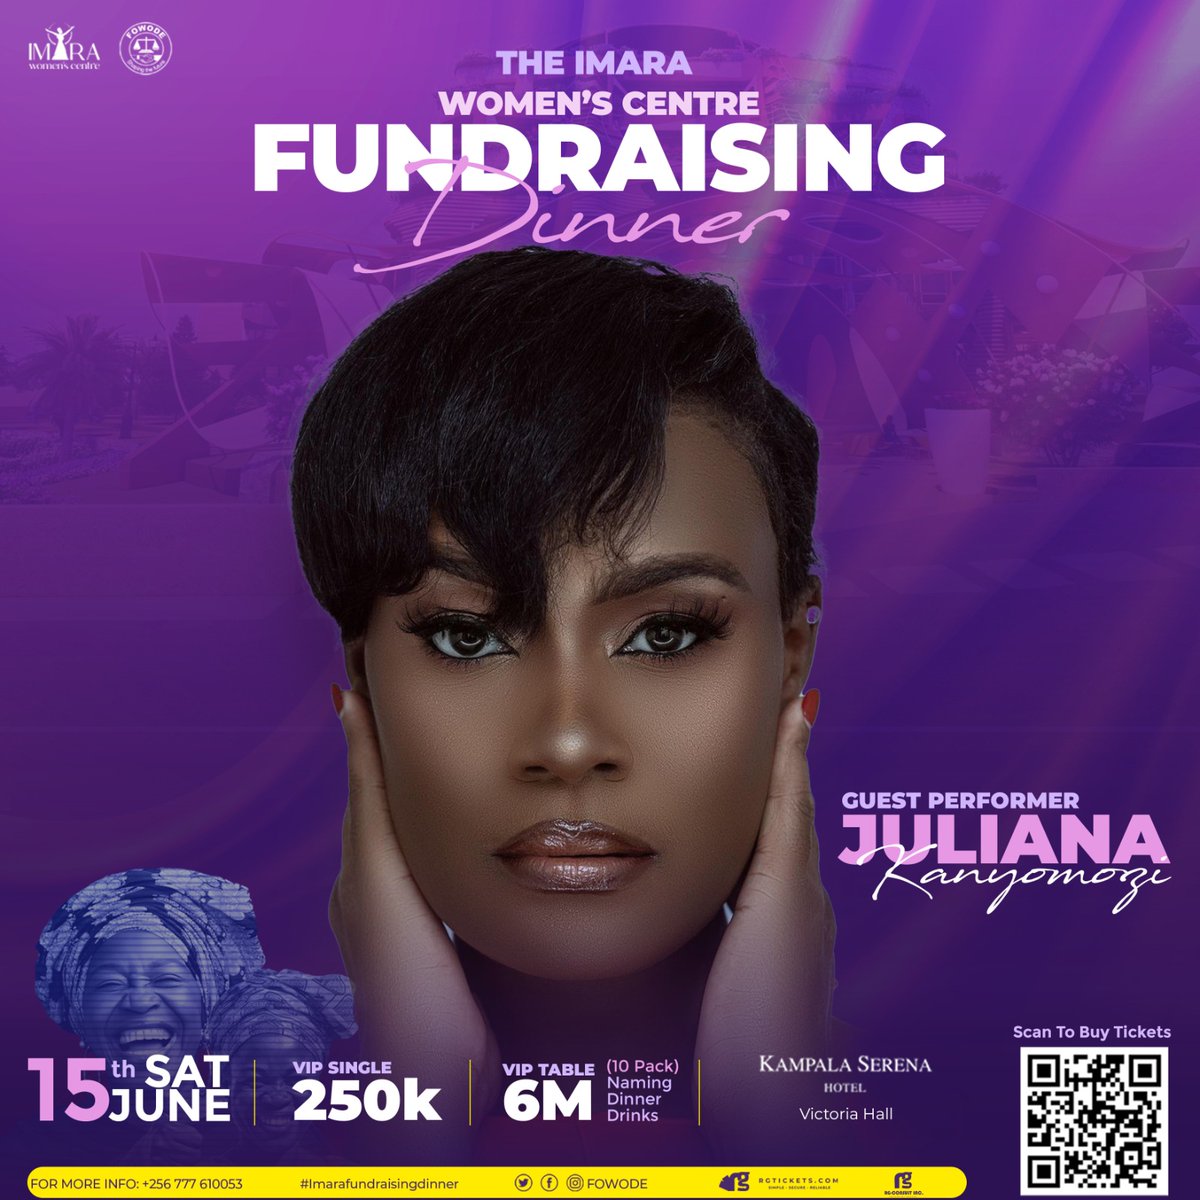 .@JKanyomozi will be a guest performer at #ImaraFundraisingDinner (15th June at Kampala Serena Hotel Victoria Hall) Buy your tickets via bit.ly/ImaraFundraiser Or Partners/sponsors can email z.isaac.ug@rgconsultinc.com #ImagineImaraWithUs #ImaraCentre @patriciamunabi